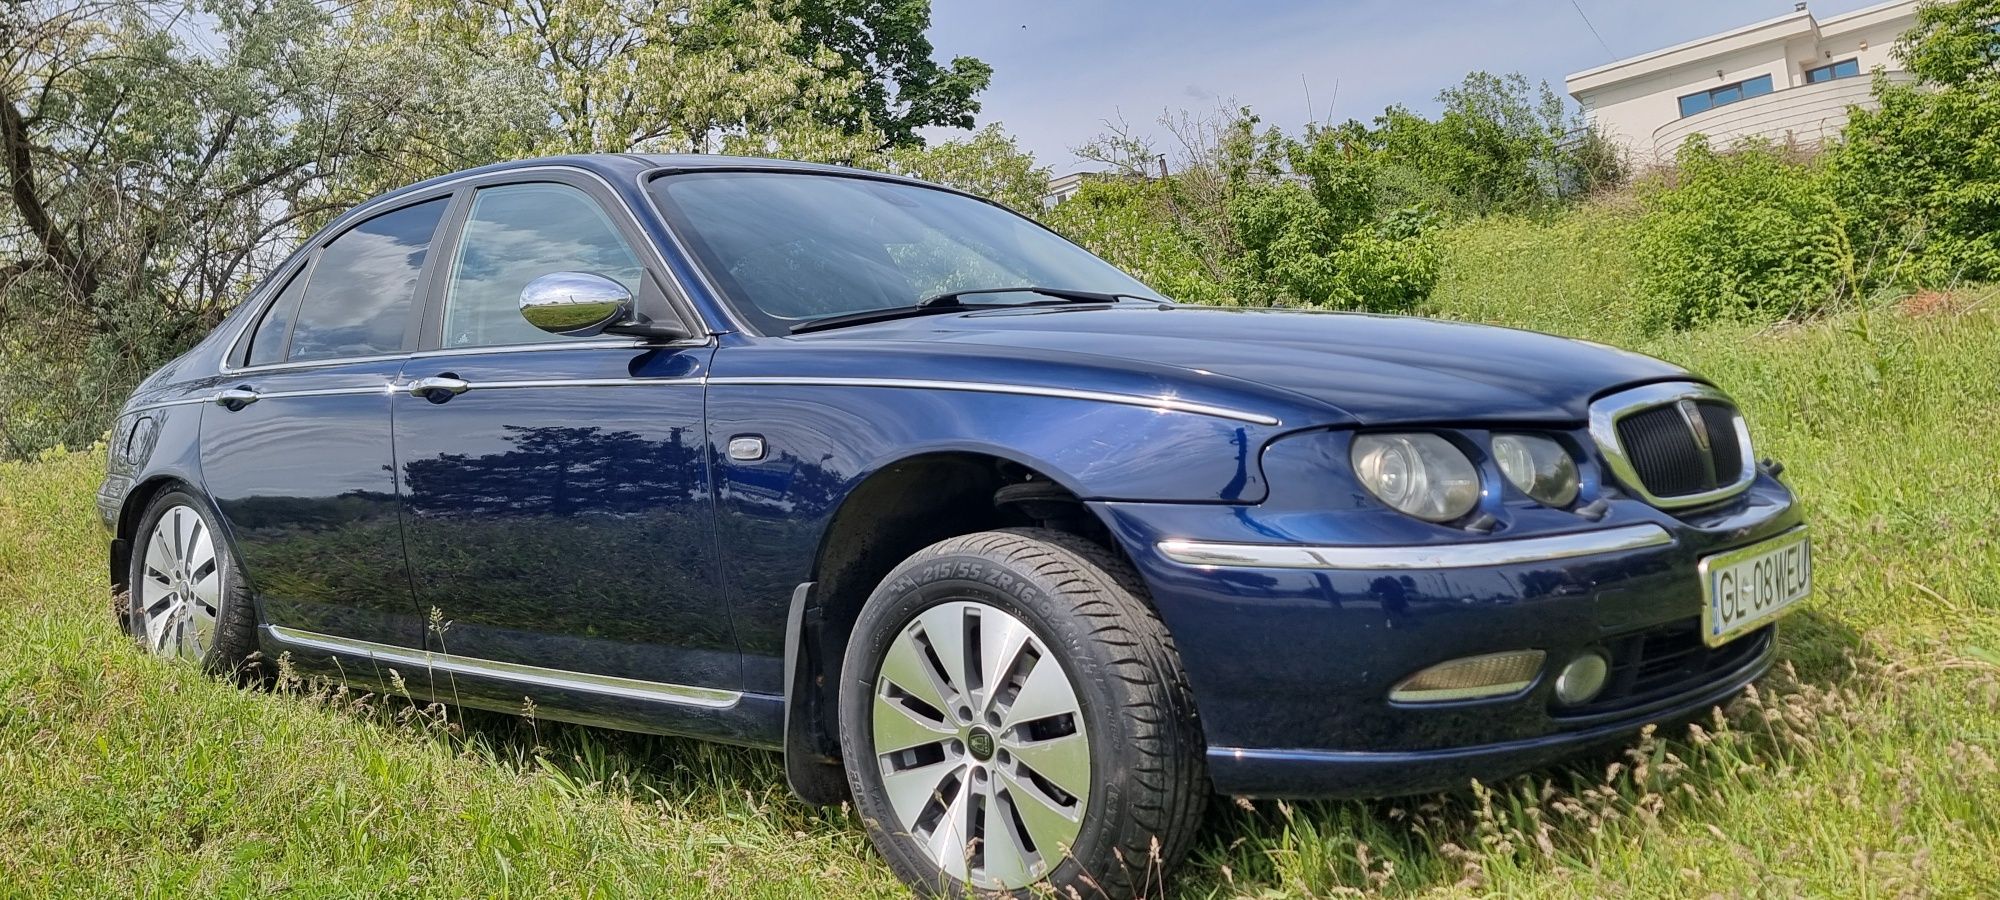 Vand Rover 75 2.0D an 2001 complet reconditionat full , automat